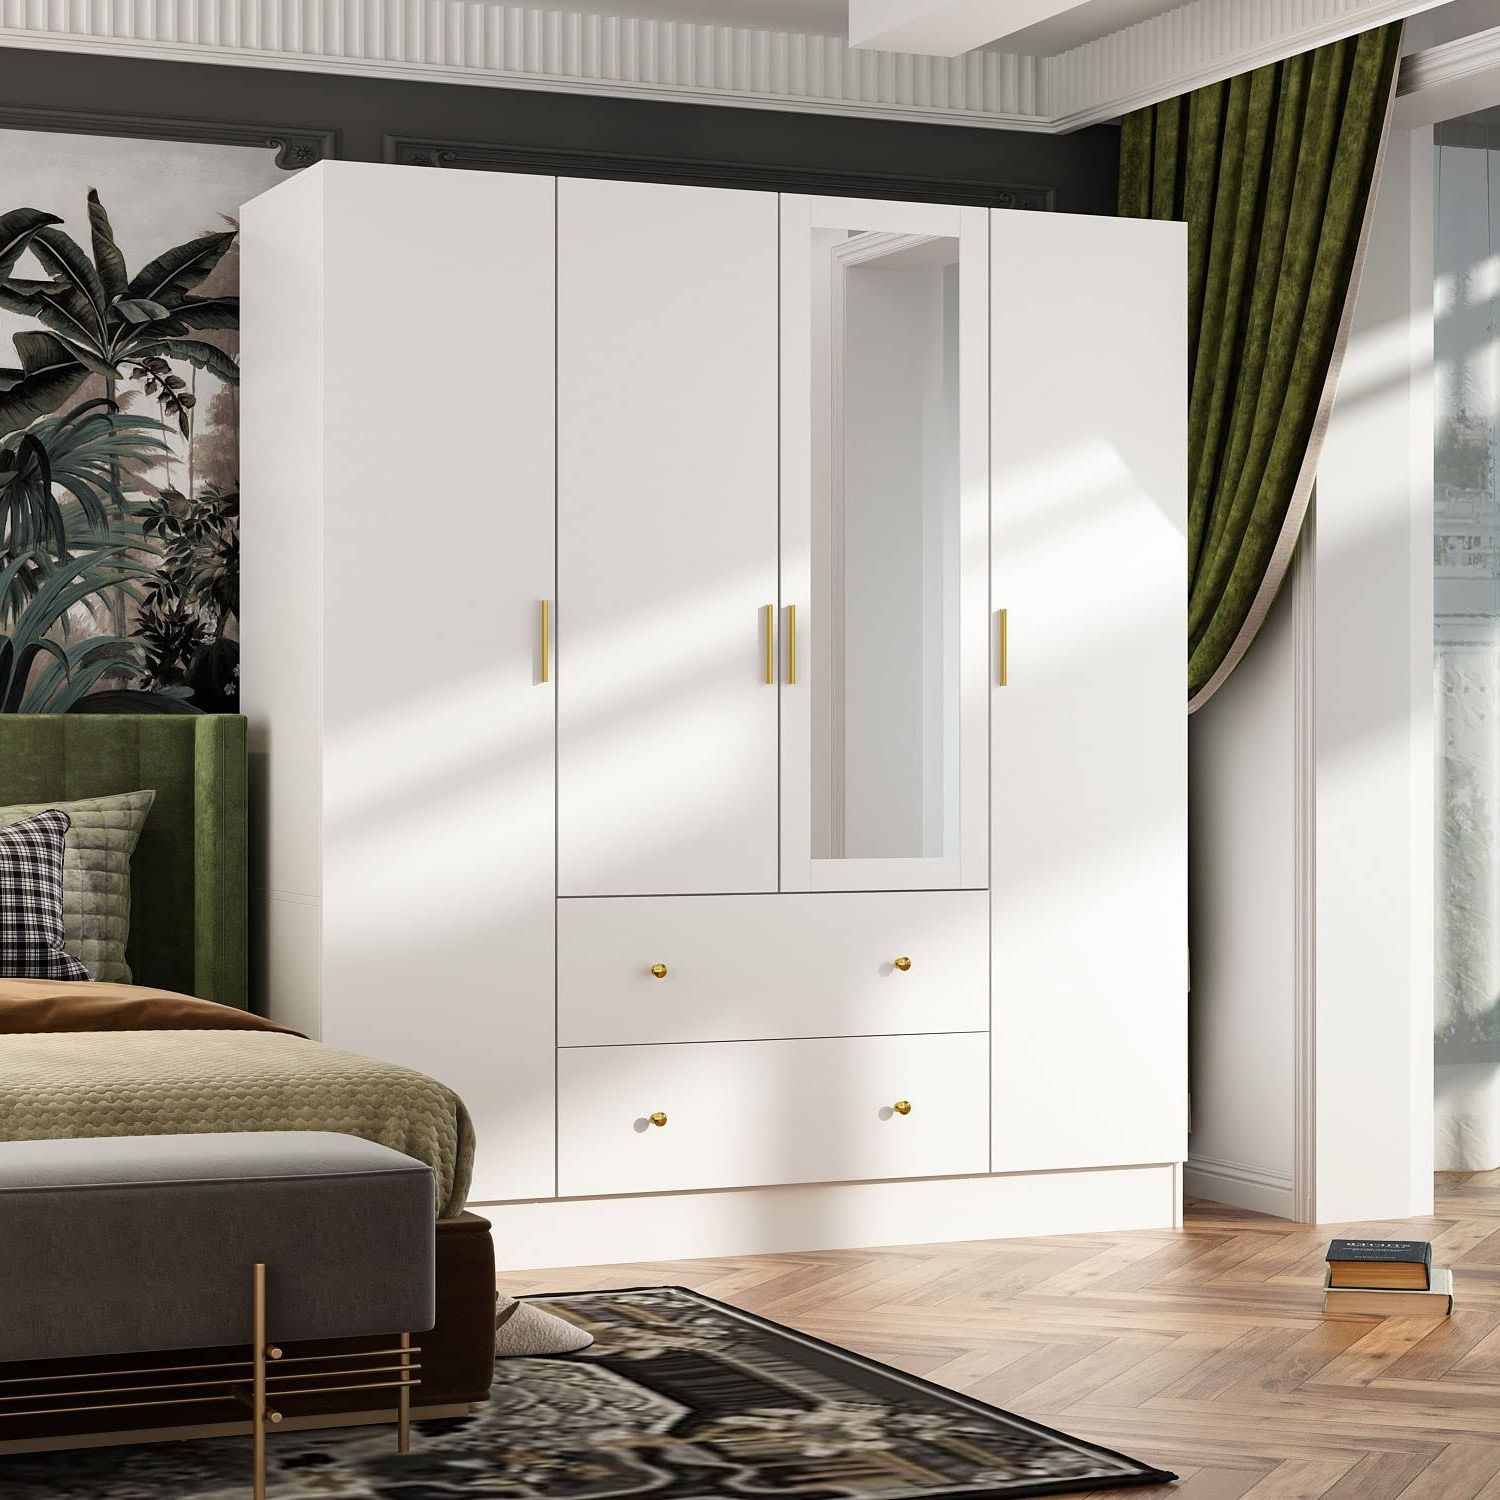 Fashionable Wardrobes With 4 Shelves Intended For Amazon: Famapy 4 Door Wardrobe Closet With Mirror, Armoires And  Wardrobes With Drawers And Shelves, Armoire Wardrobe Closet With Hanging  Rod, Bedroom Armoires White (63”w X 19.7”d X 70.9”h) : Home & Kitchen (Photo 8 of 10)